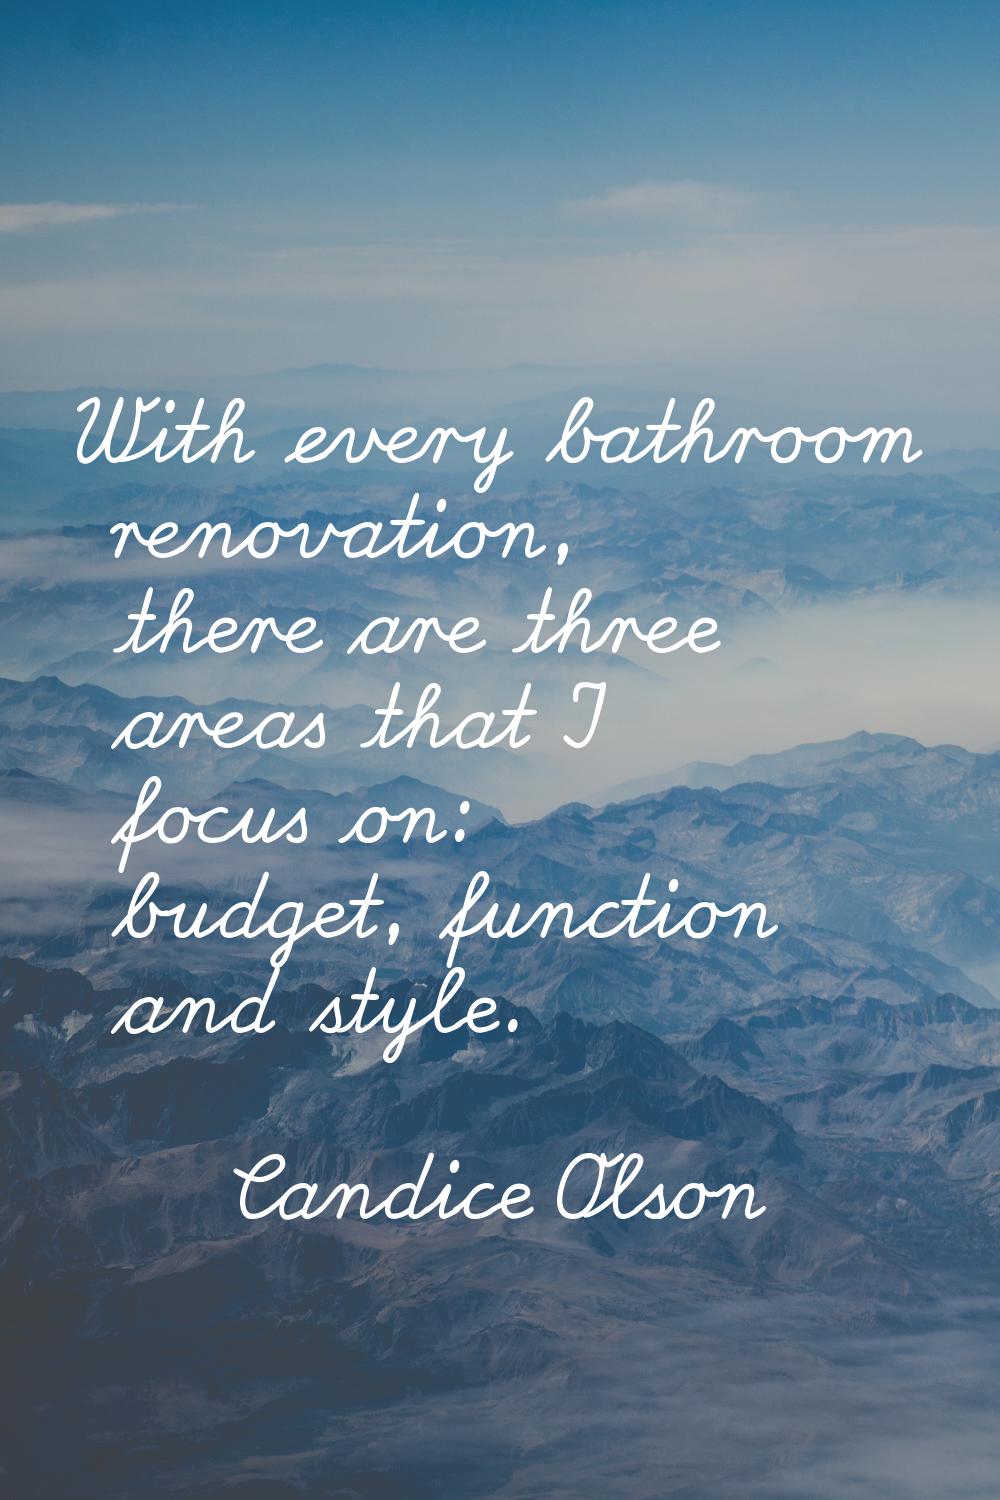 With every bathroom renovation, there are three areas that I focus on: budget, function and style.